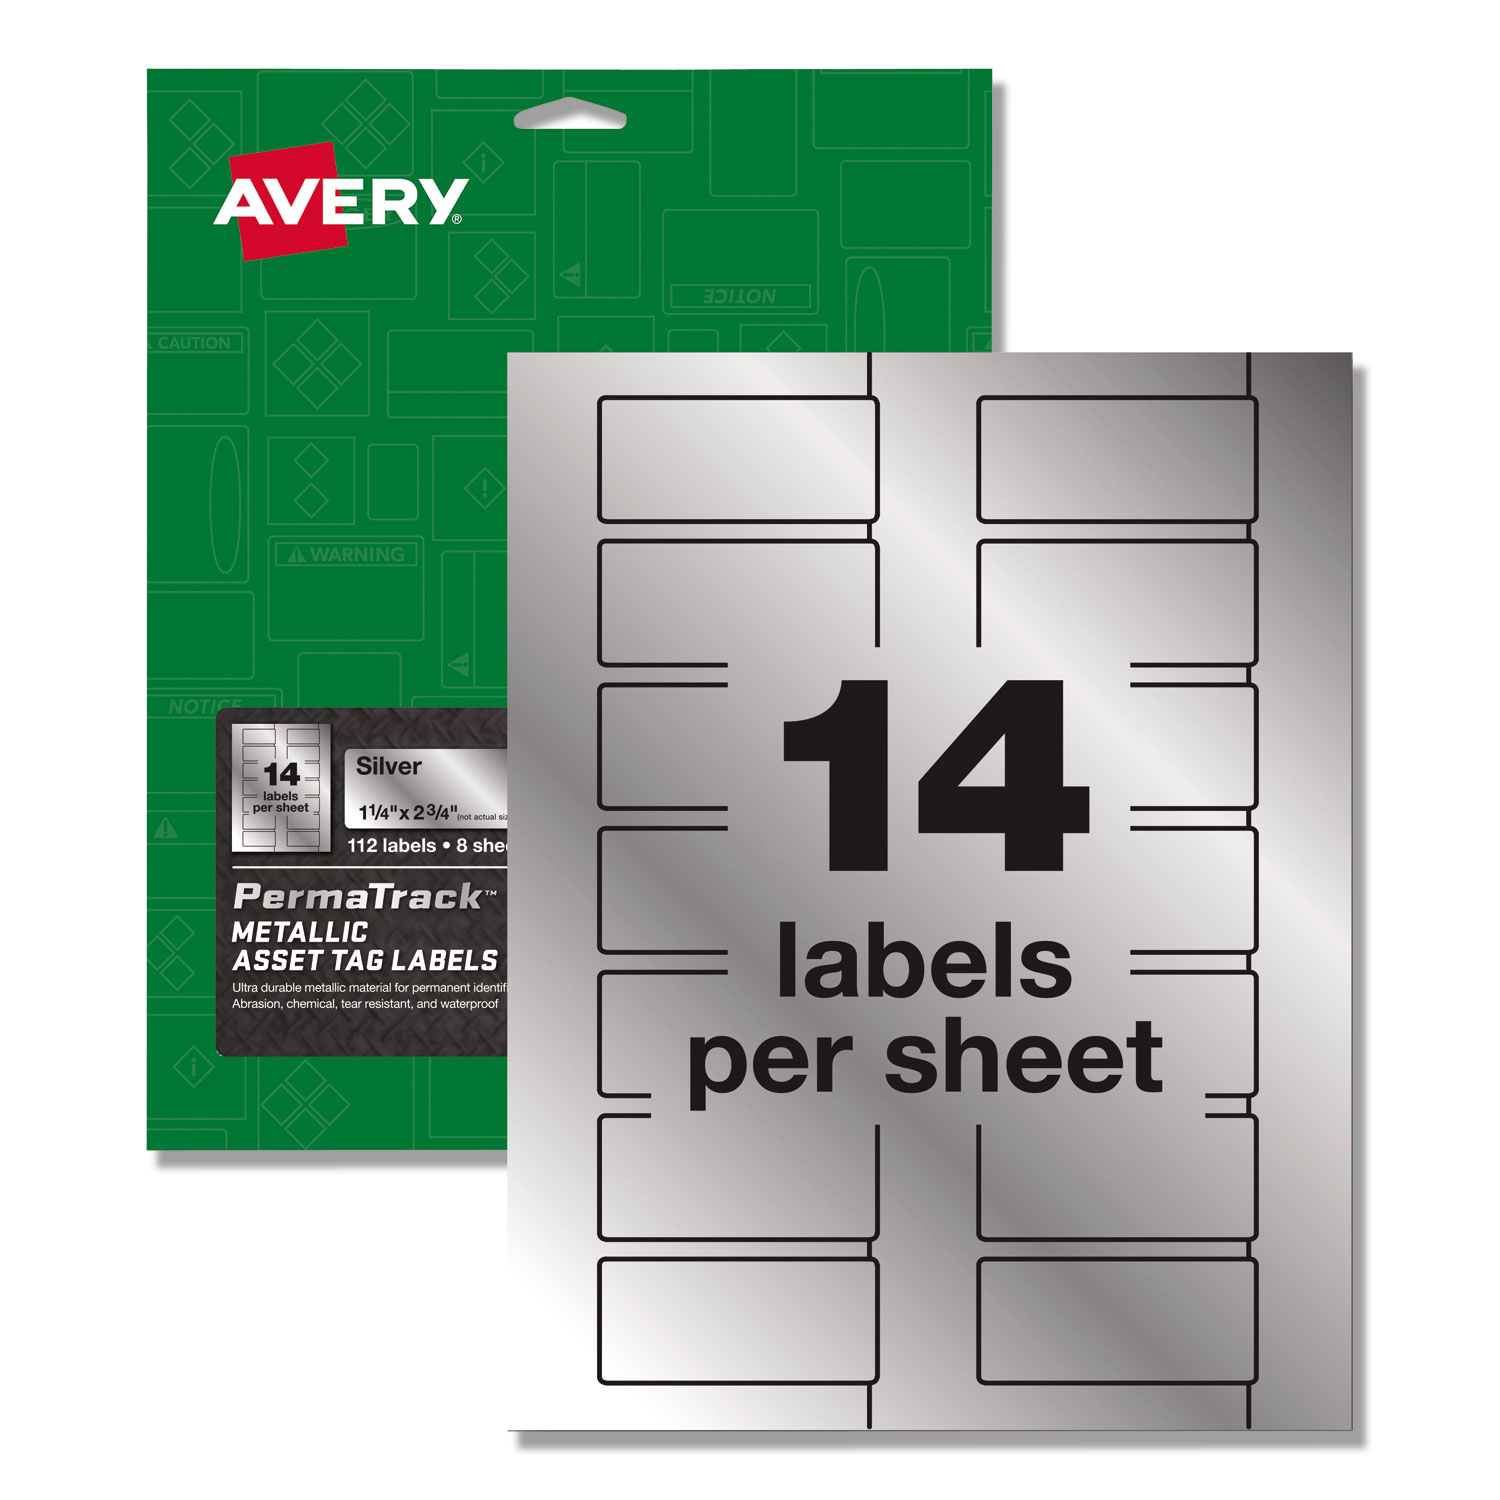  Avery 61528 PermaTrack Metallic Asset Tag Labels, Laser Printers, 1.25 x 2.75, Silver, 14/Sheet, 8 Sheets/Pack (AVE61528) 